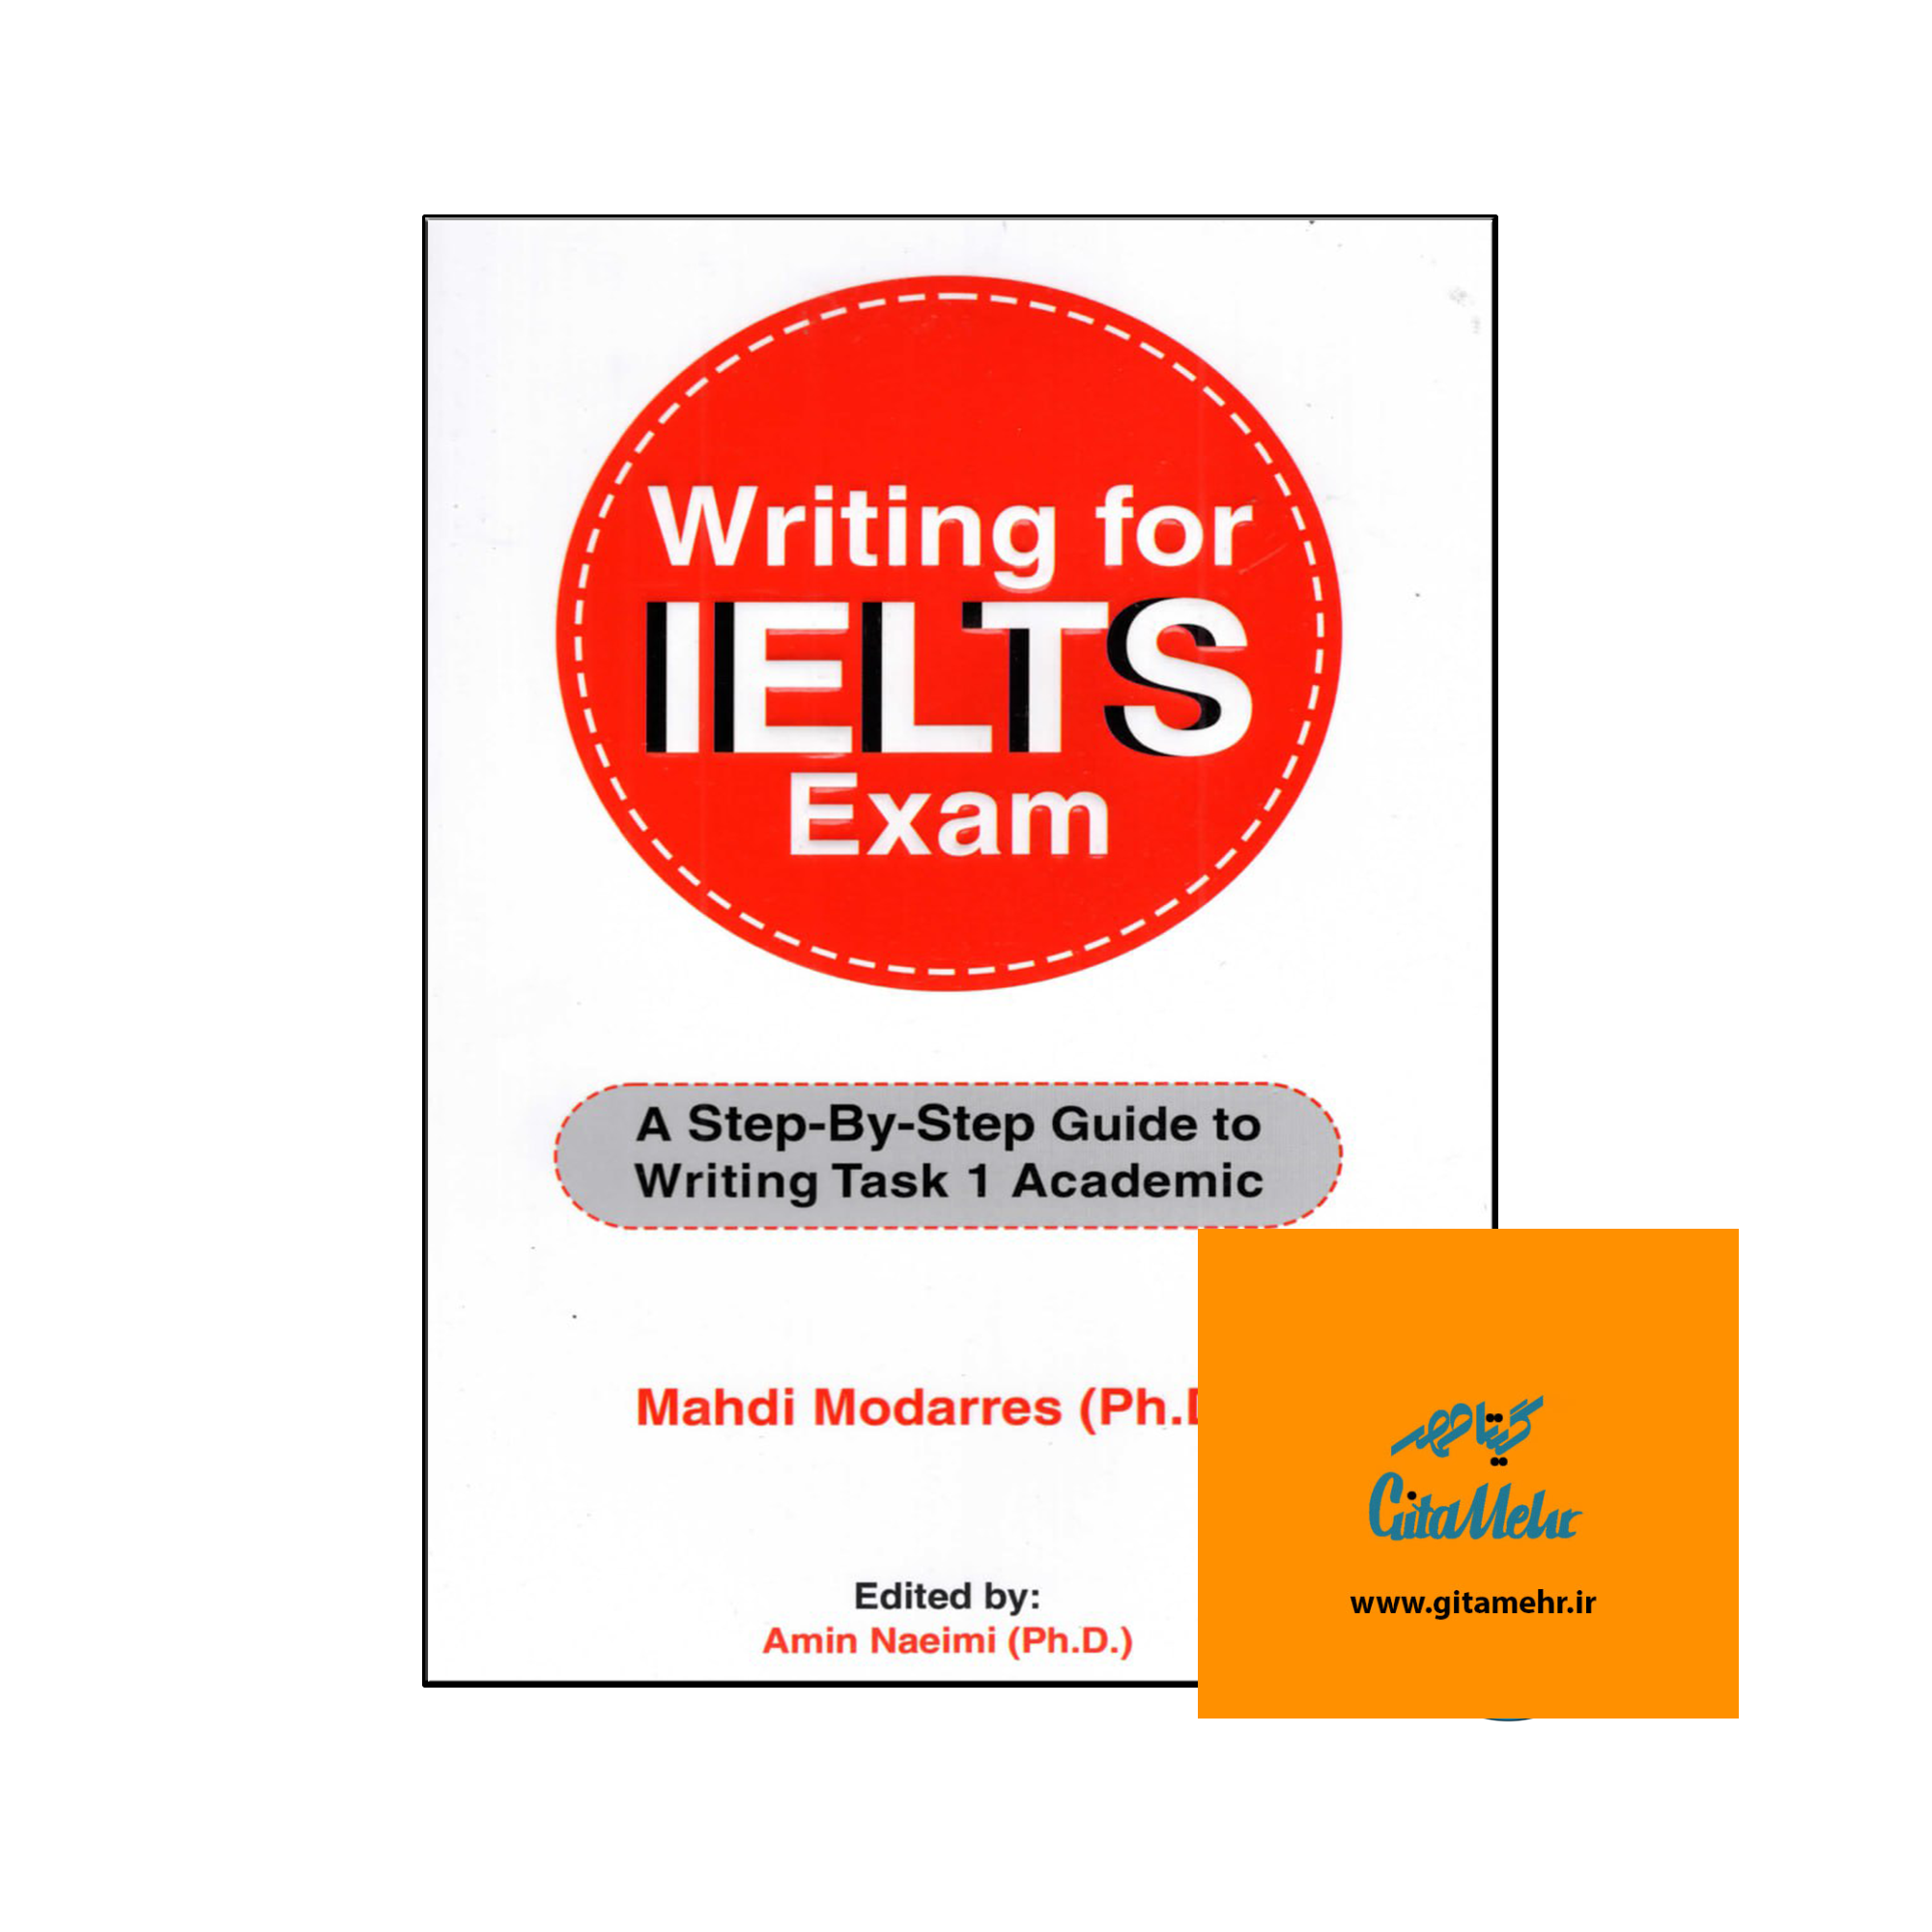 daa9d8aad8a7d8a8 writing for ielts exam a step by step guide to writing task 1 academic 65ecb1e9c1665